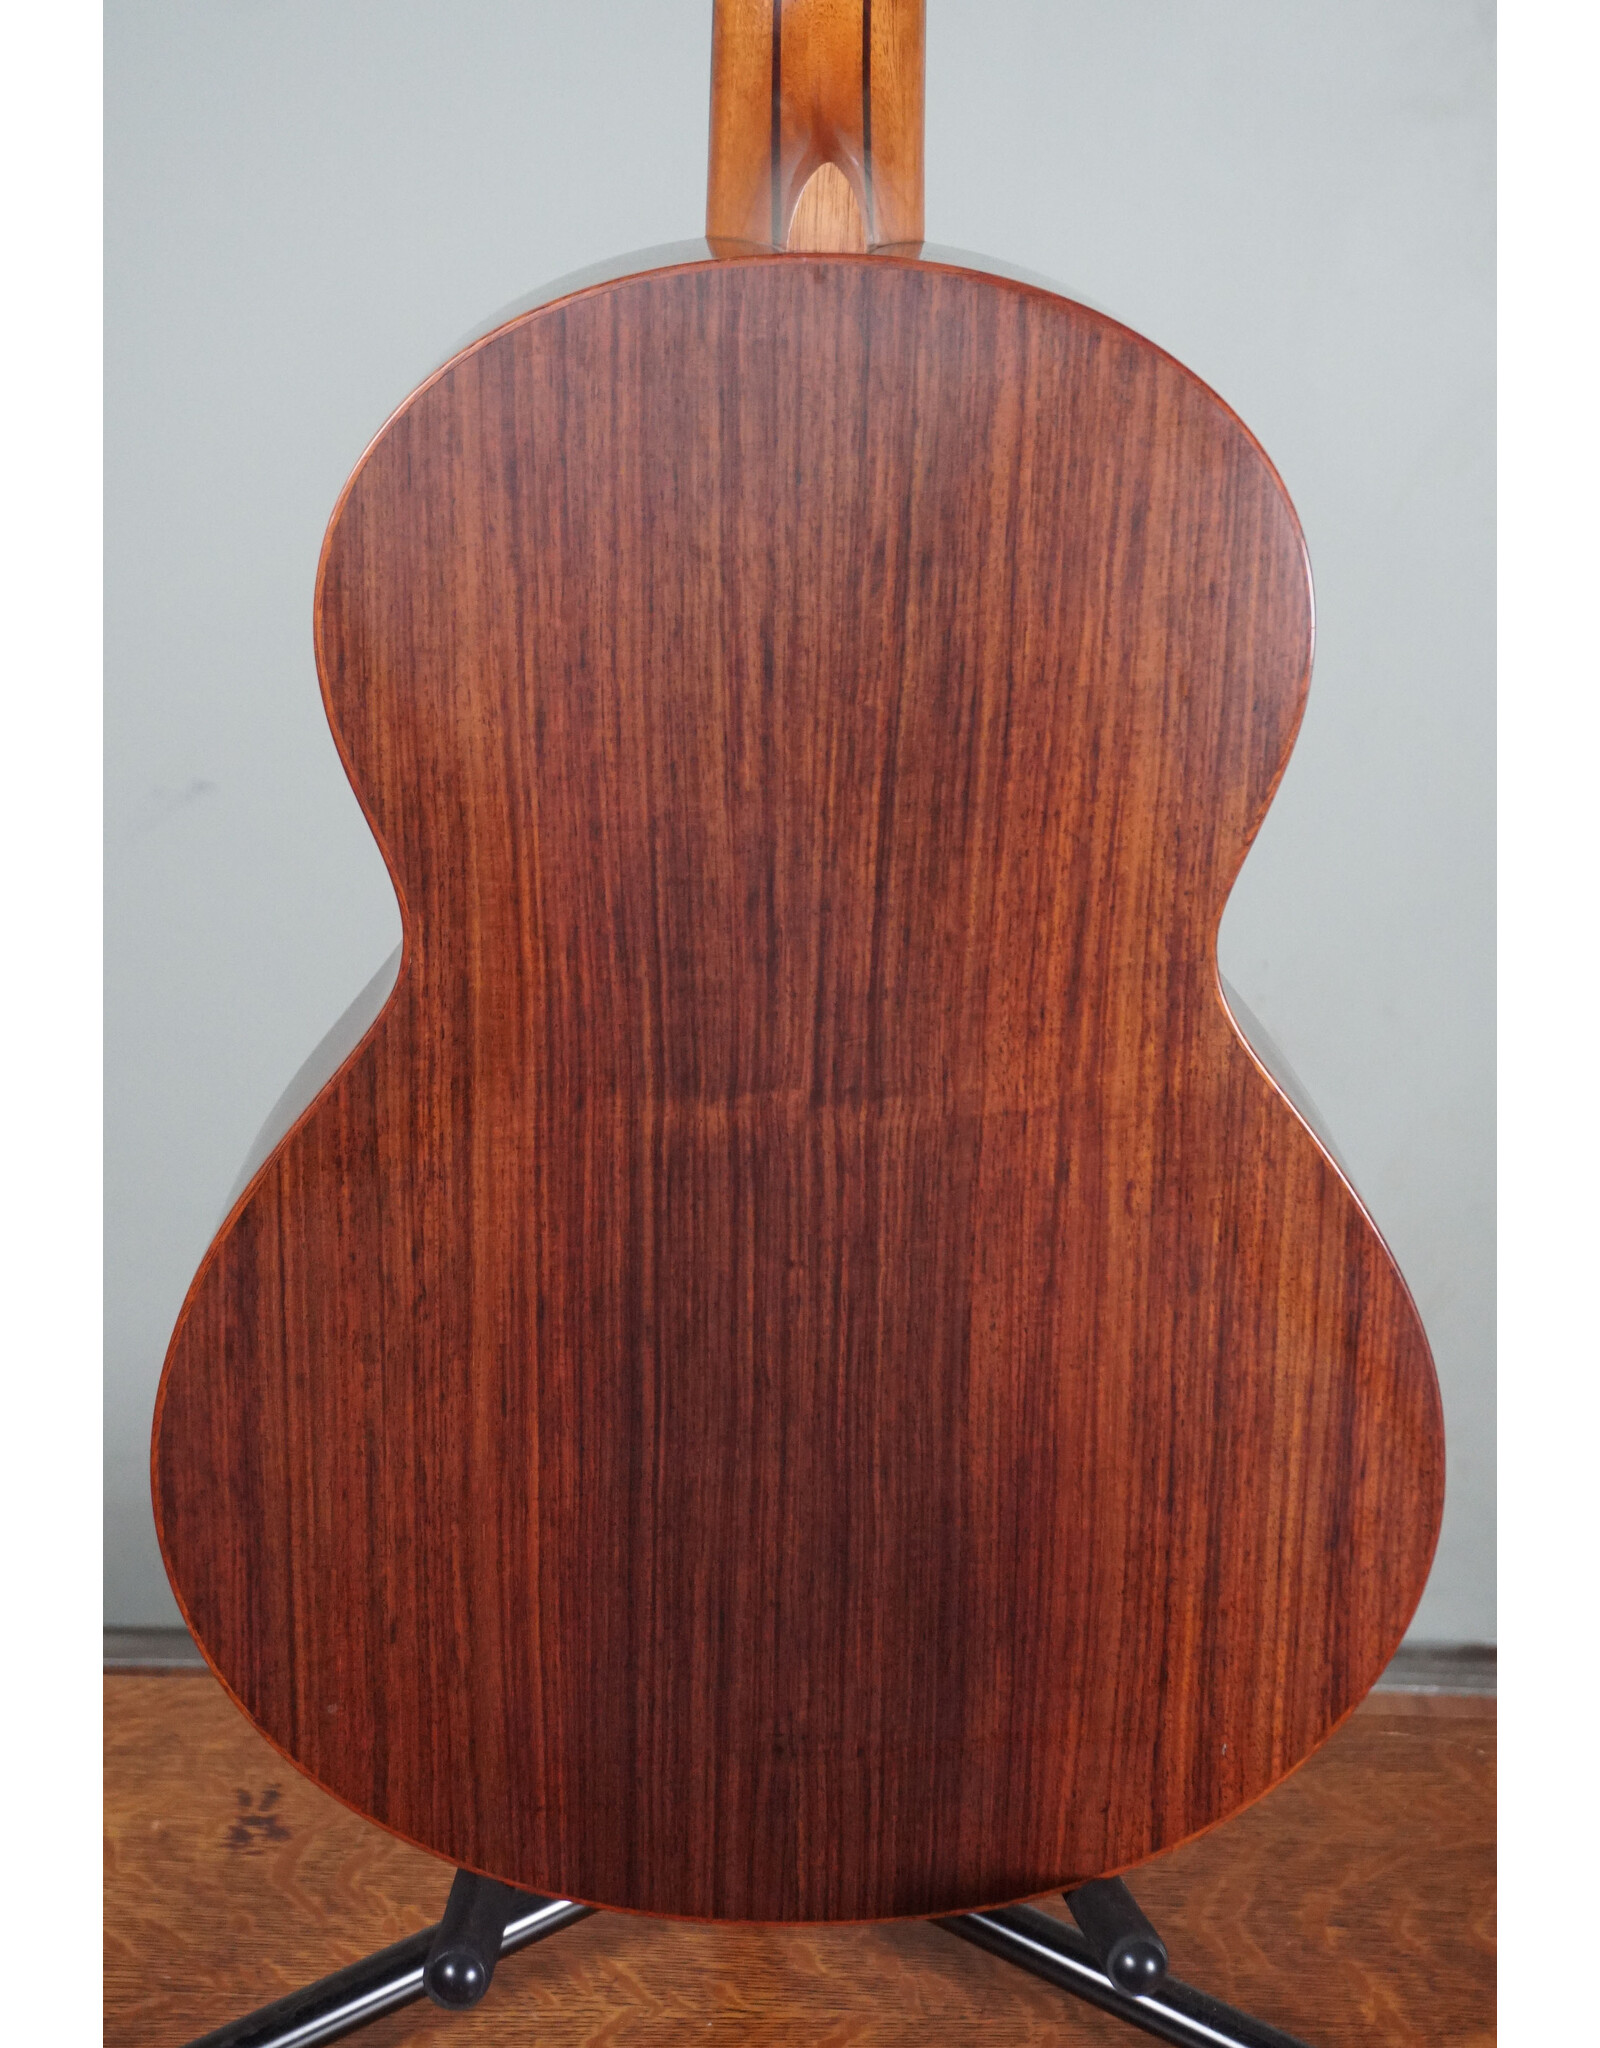 Lowden Lowden WL-25 "Wee Lowden Red Cedar/East Indian Rosewood Parlor Guitar w/ Calton Case, Used